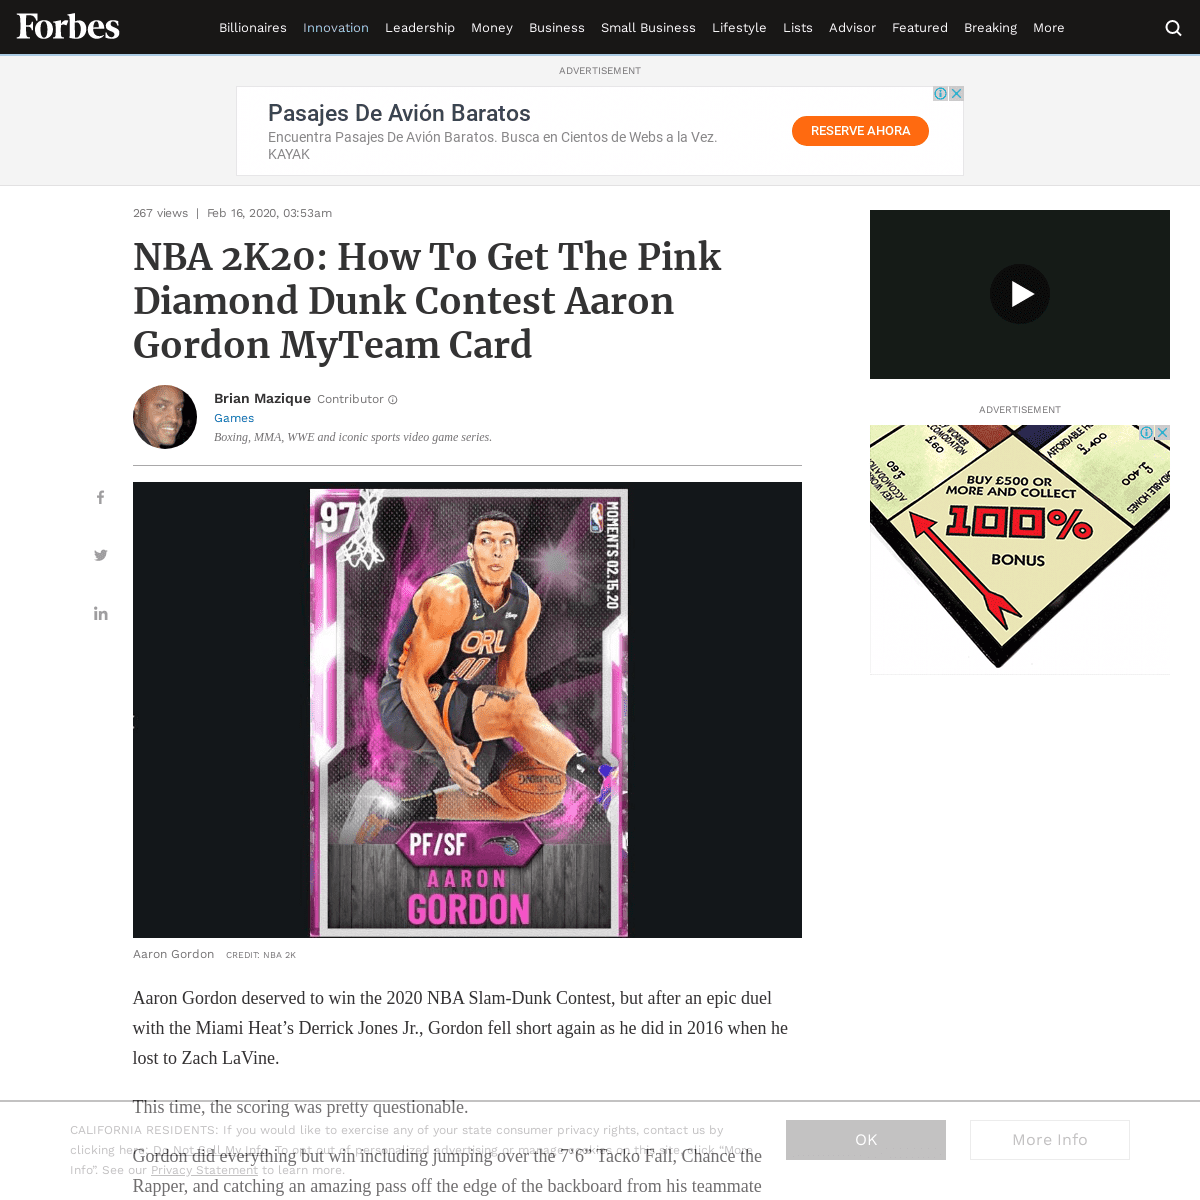 A complete backup of www.forbes.com/sites/brianmazique/2020/02/16/nba-2k20-how-to-get-the-pink-diamond-dunk-contest-aaron-gordon